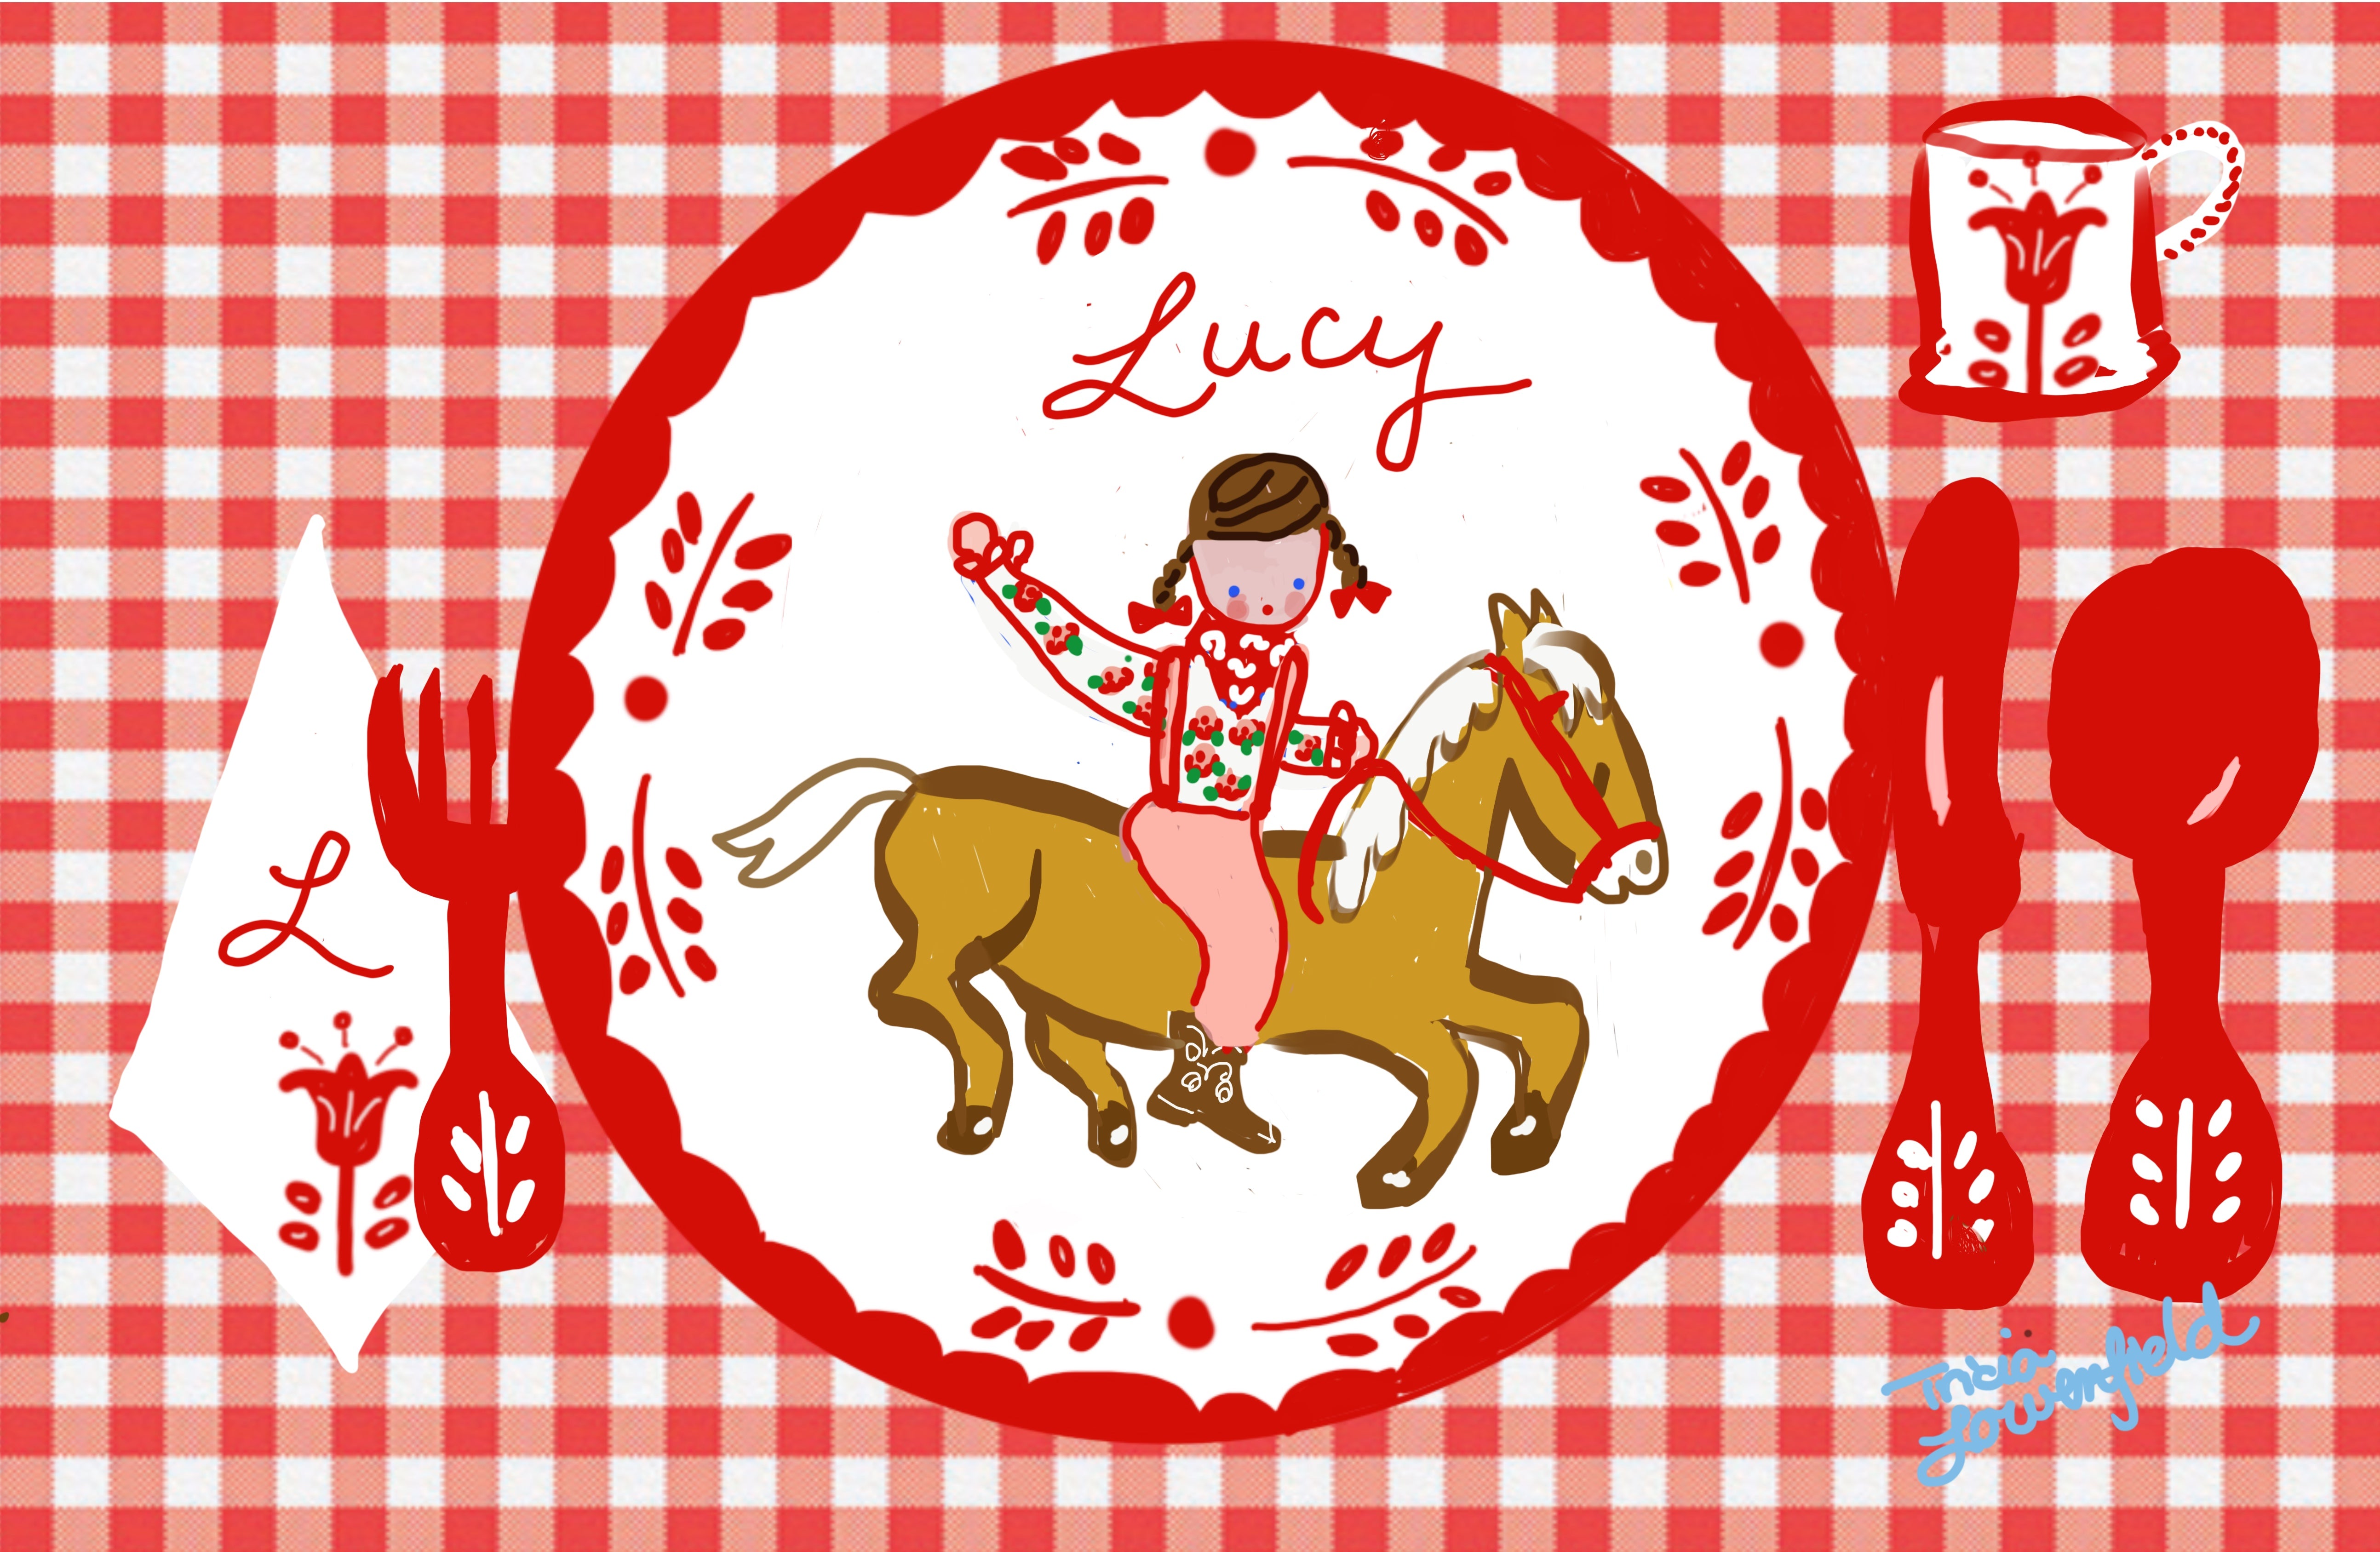 Laminated Placemat - Cowgirl on Horse - Tricia Lowenfield Design